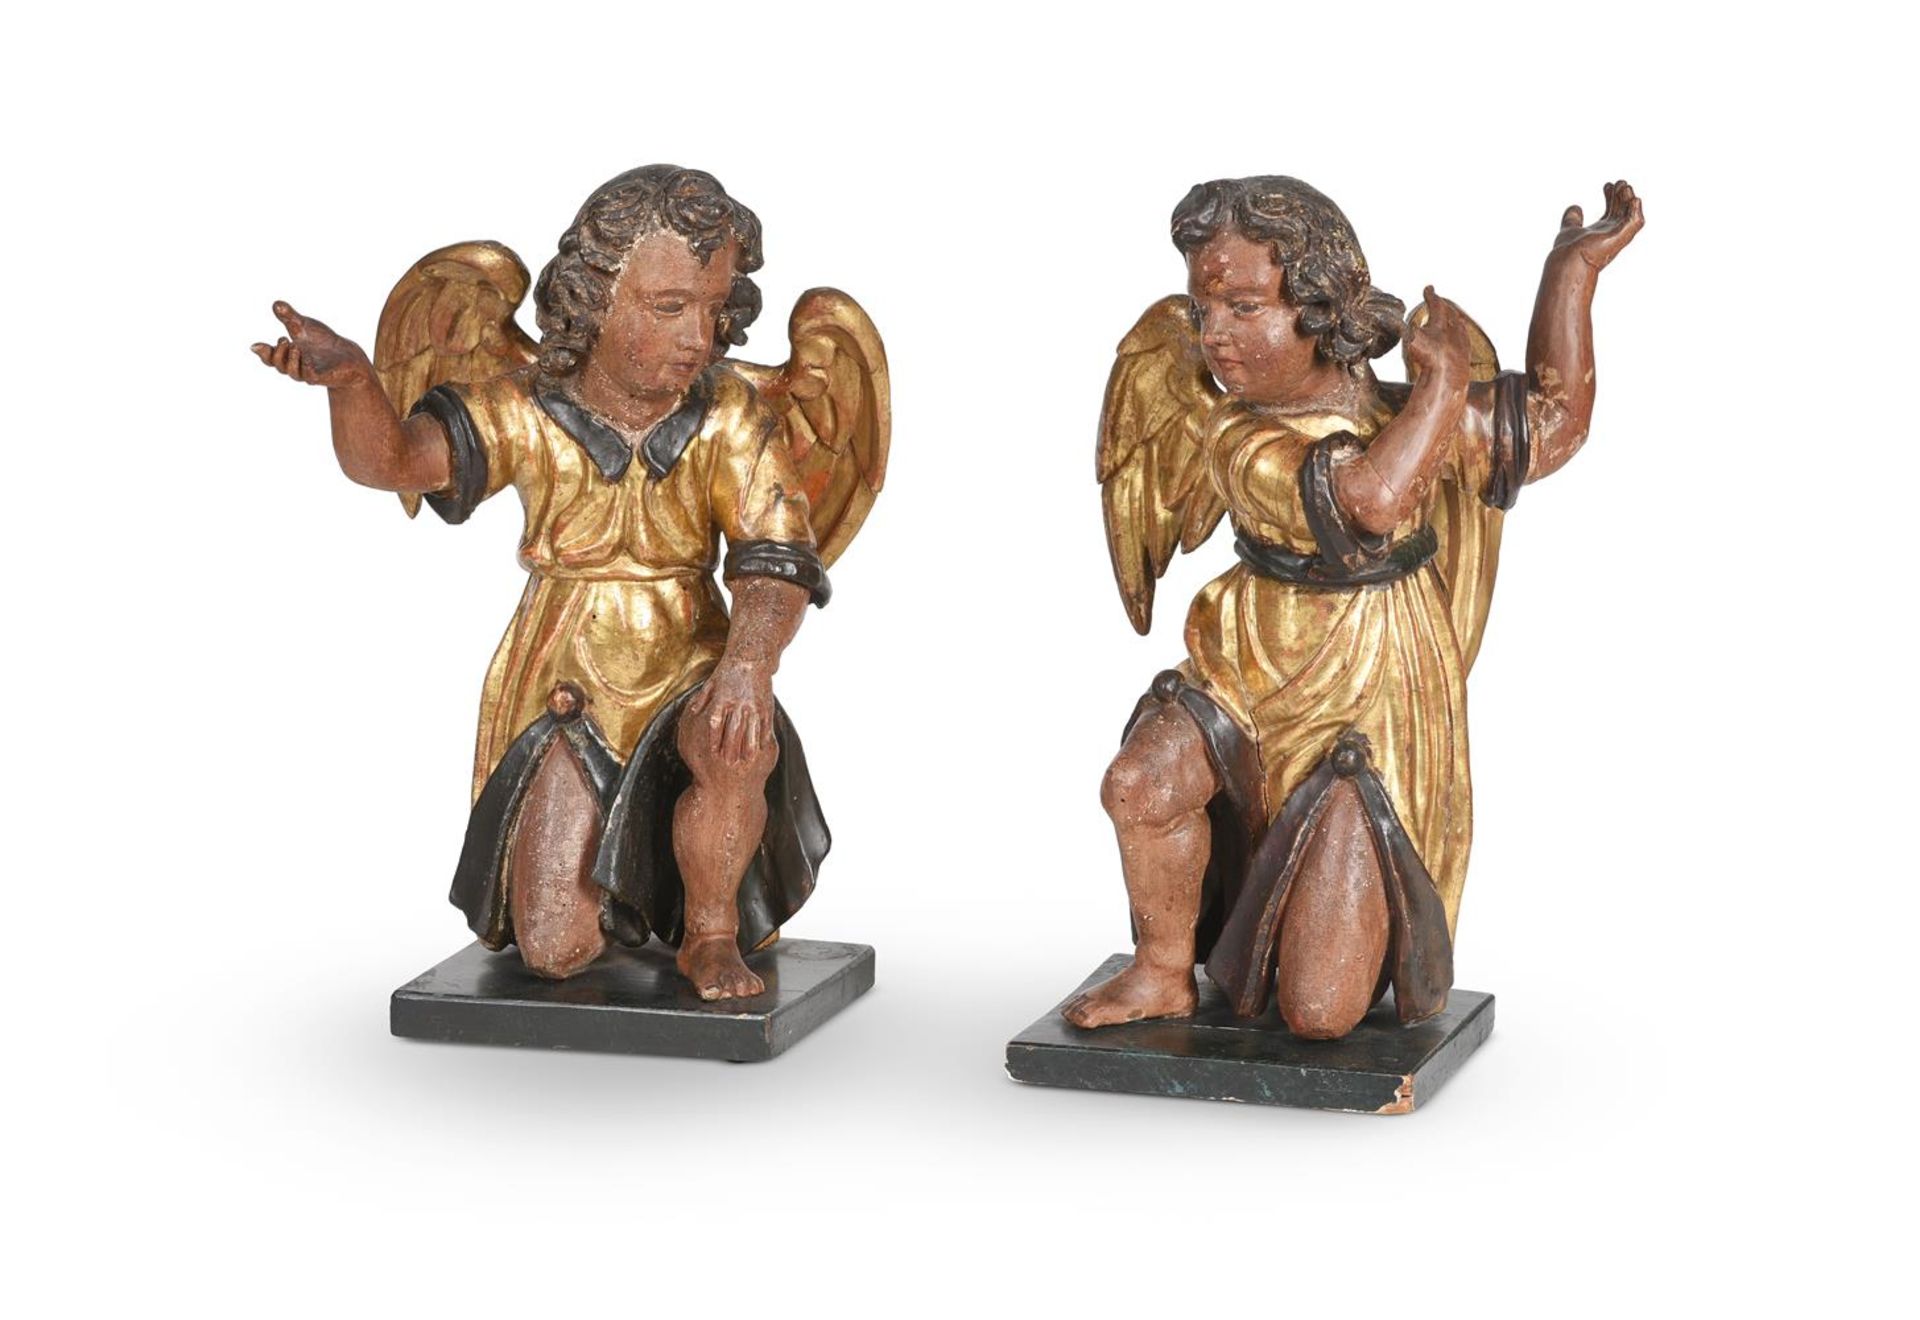 A PAIR OF POLYCHROME AND GILT FIGURES OF ANGELS, PROBABLY FRENCH, 18TH CENTURY AND LATER